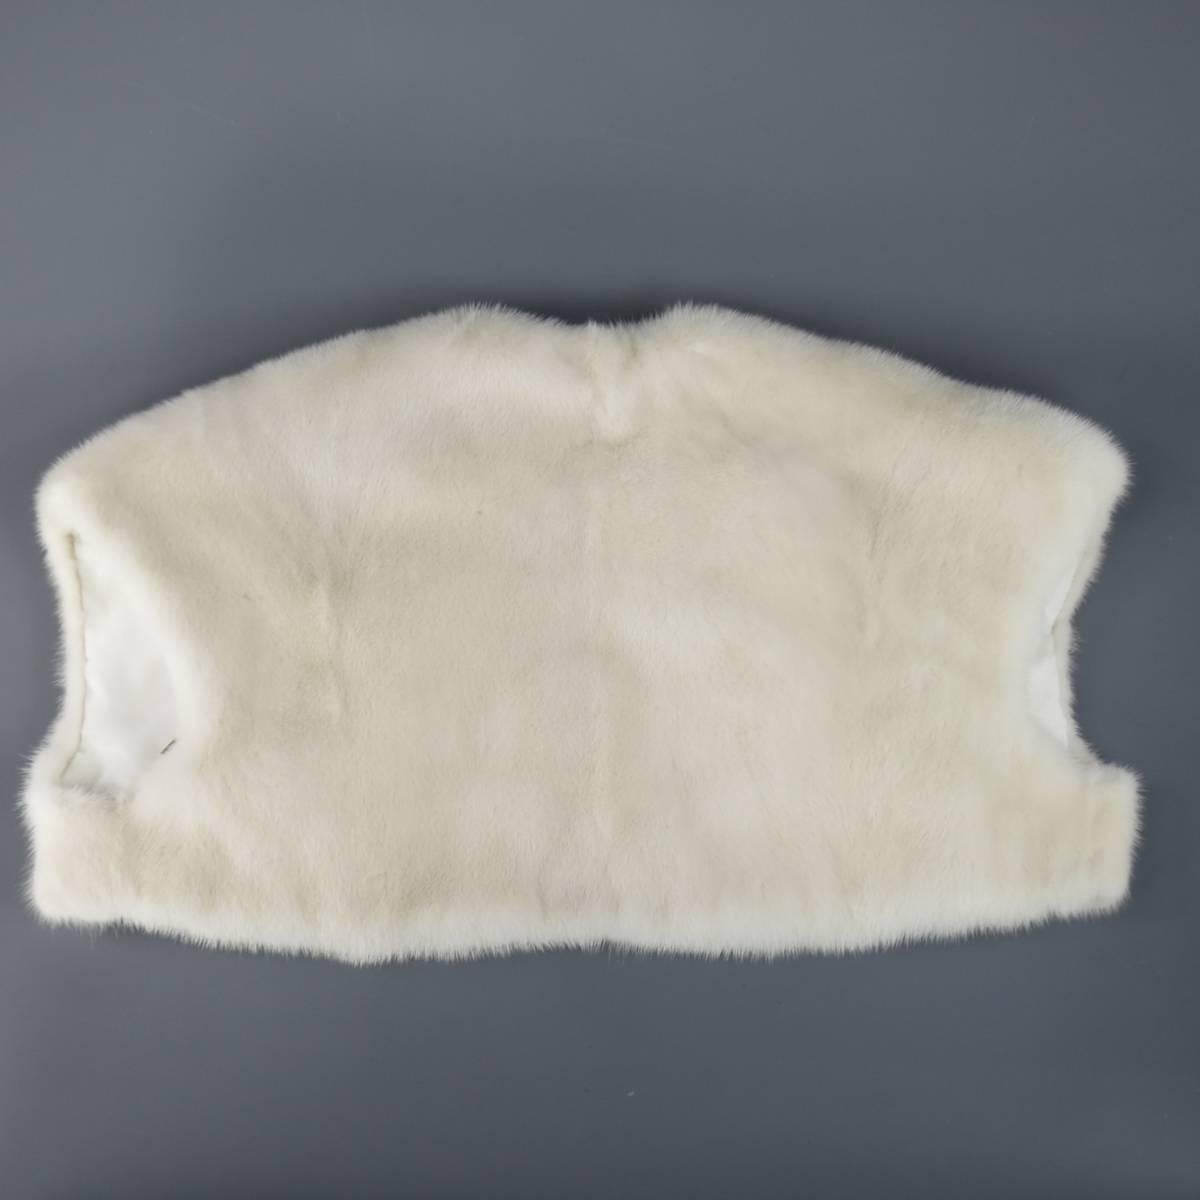 Chic MARY MCFADDEN cropped bolero shrug in off white cream mink fur with satin lining. Made in USA.
Retails at $1250.00.
 
Excellent Pre-Owned Condition.
 
Measurements:
 
Shoulder: 19 in.
Bust: 36 in.
Length: 11 in.